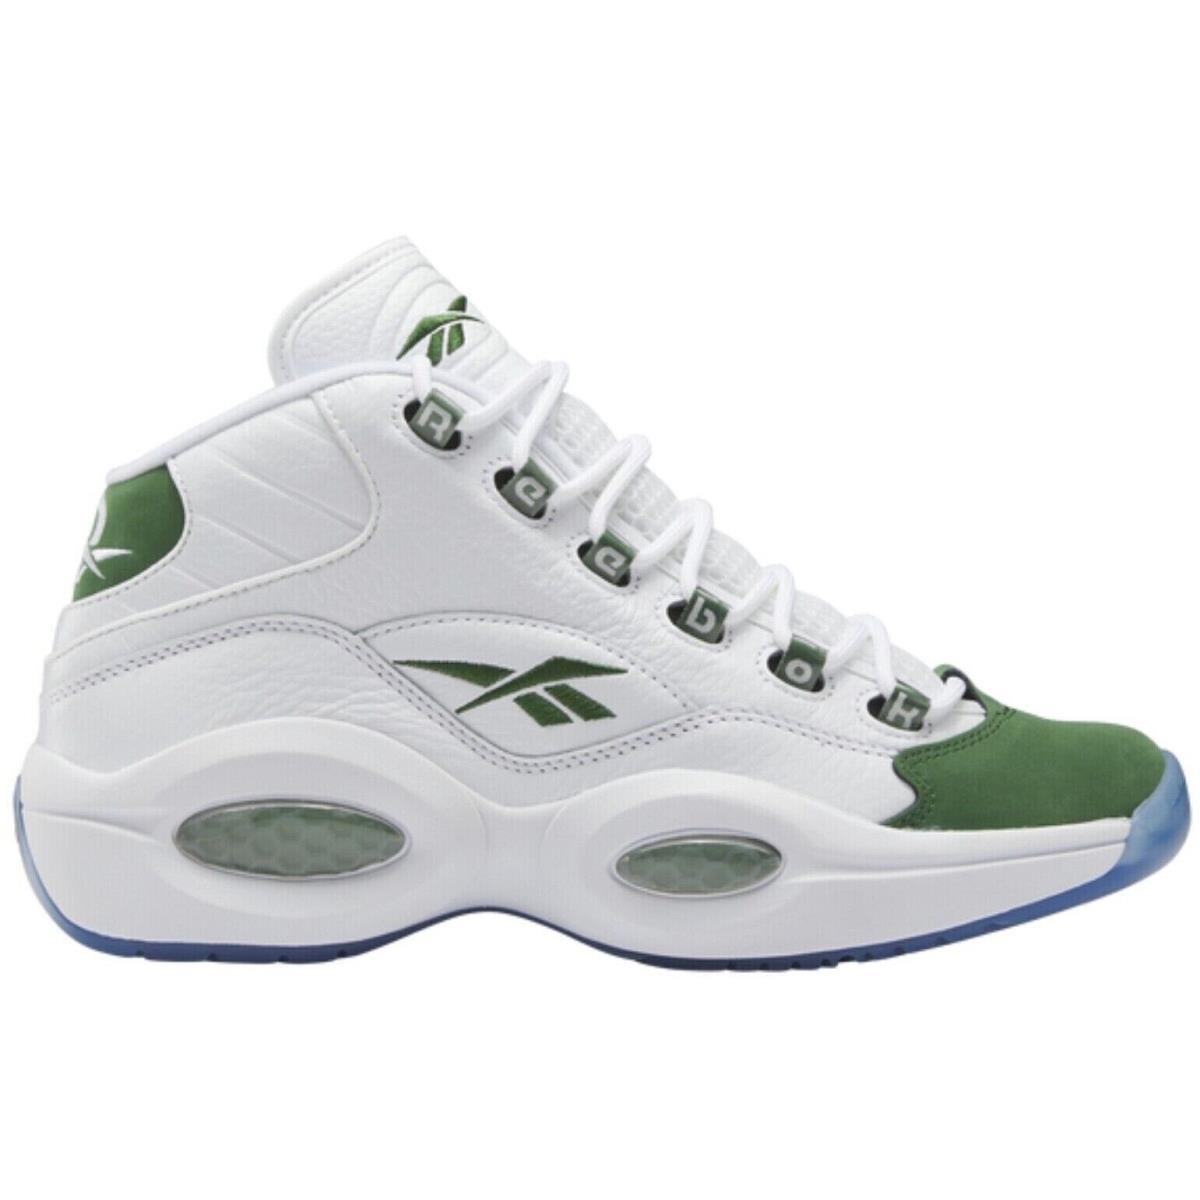 Reebok Question Mid Men`s Basketball Shoes All Colors US Sizes 7-14 White / Green